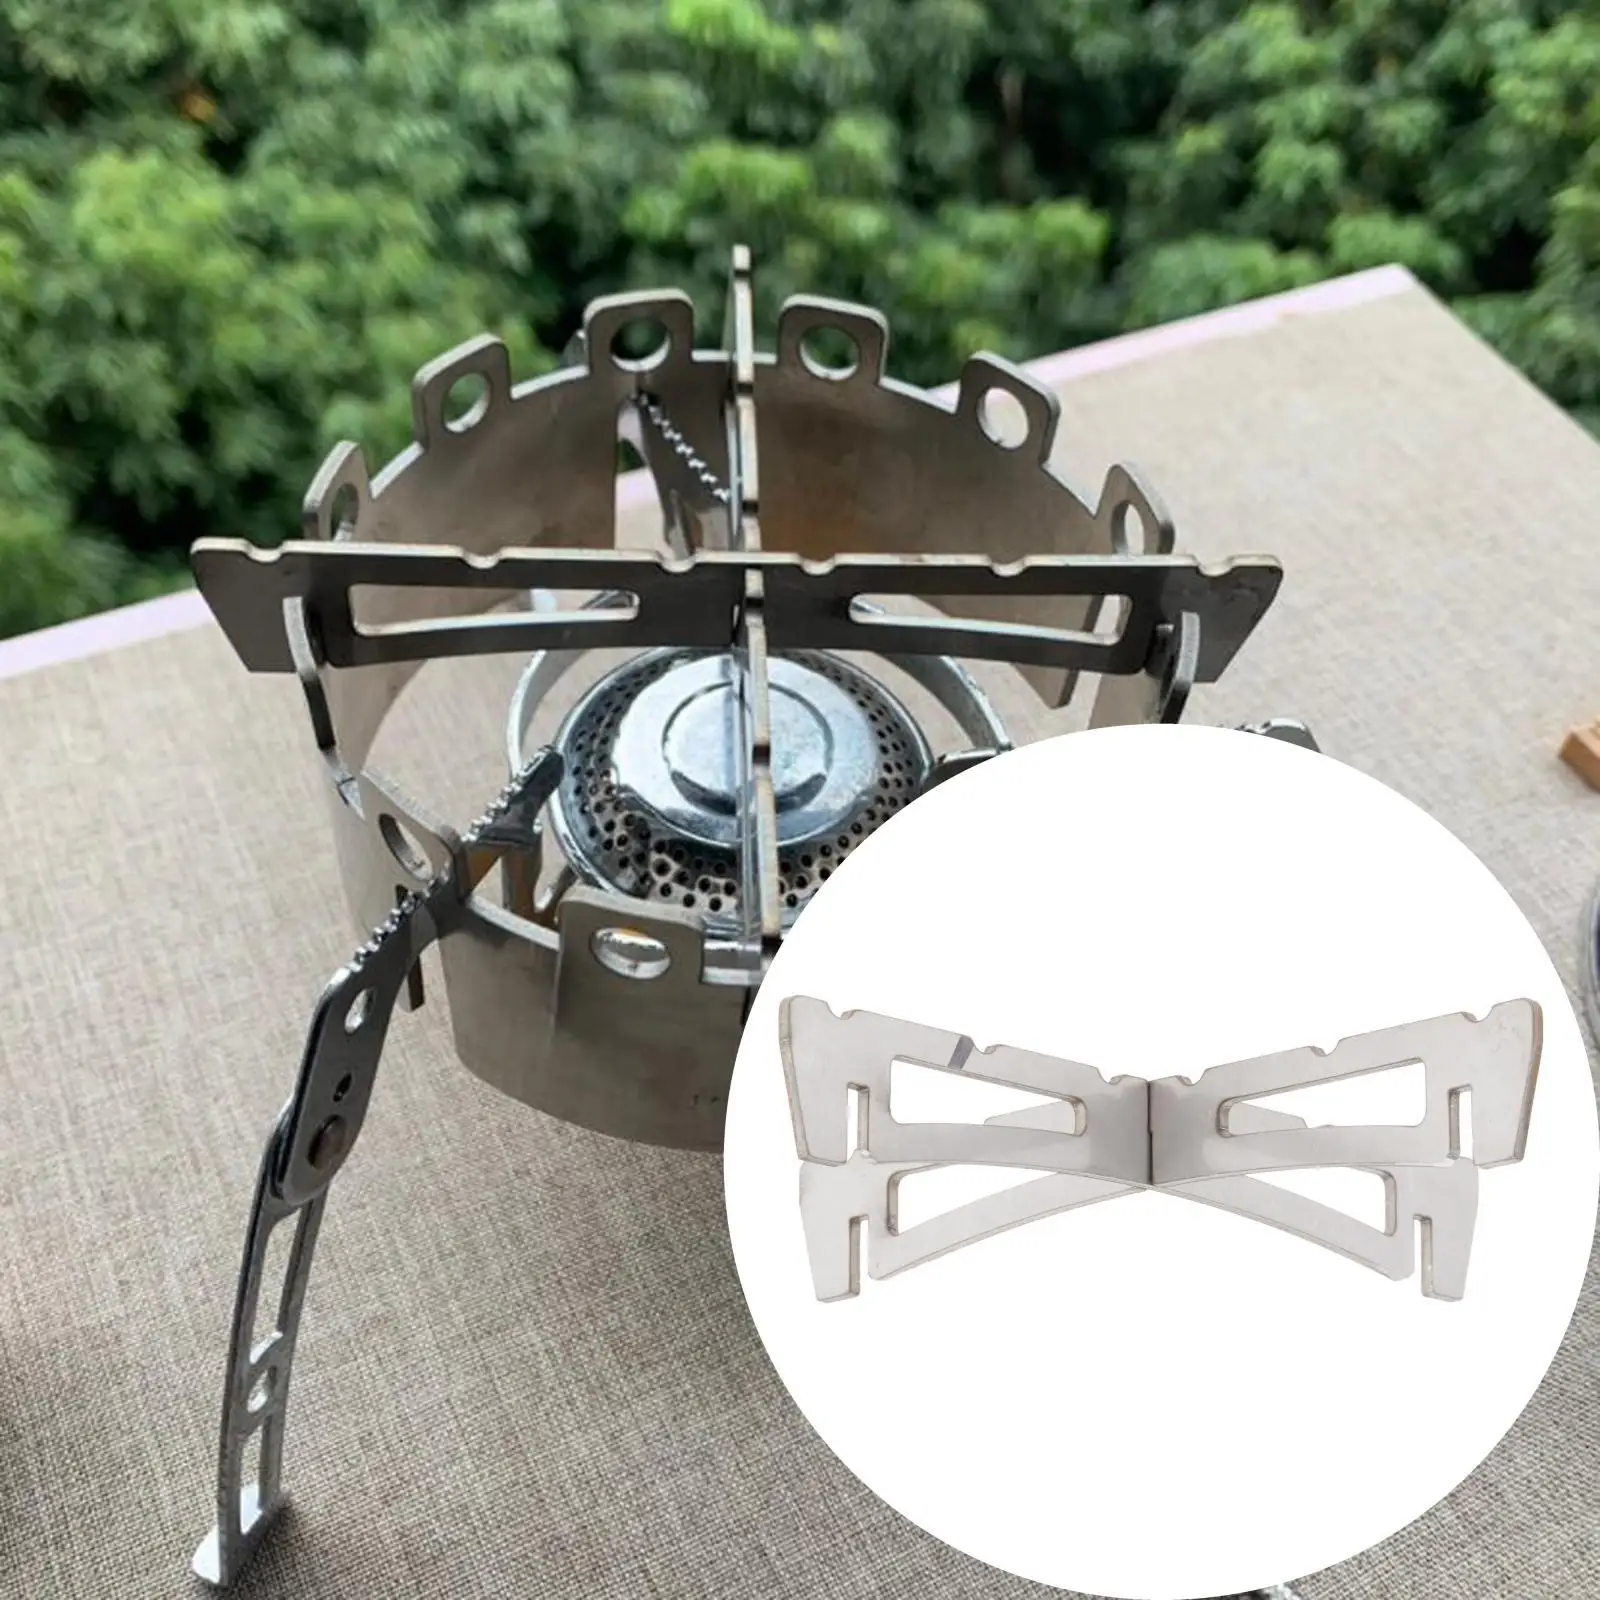 Portable Alcohol Stove Cross Stand Foldable Support Rack Accessories Spirit Stove Shelf for Backpacking Travel BBQ Hiking Picnic